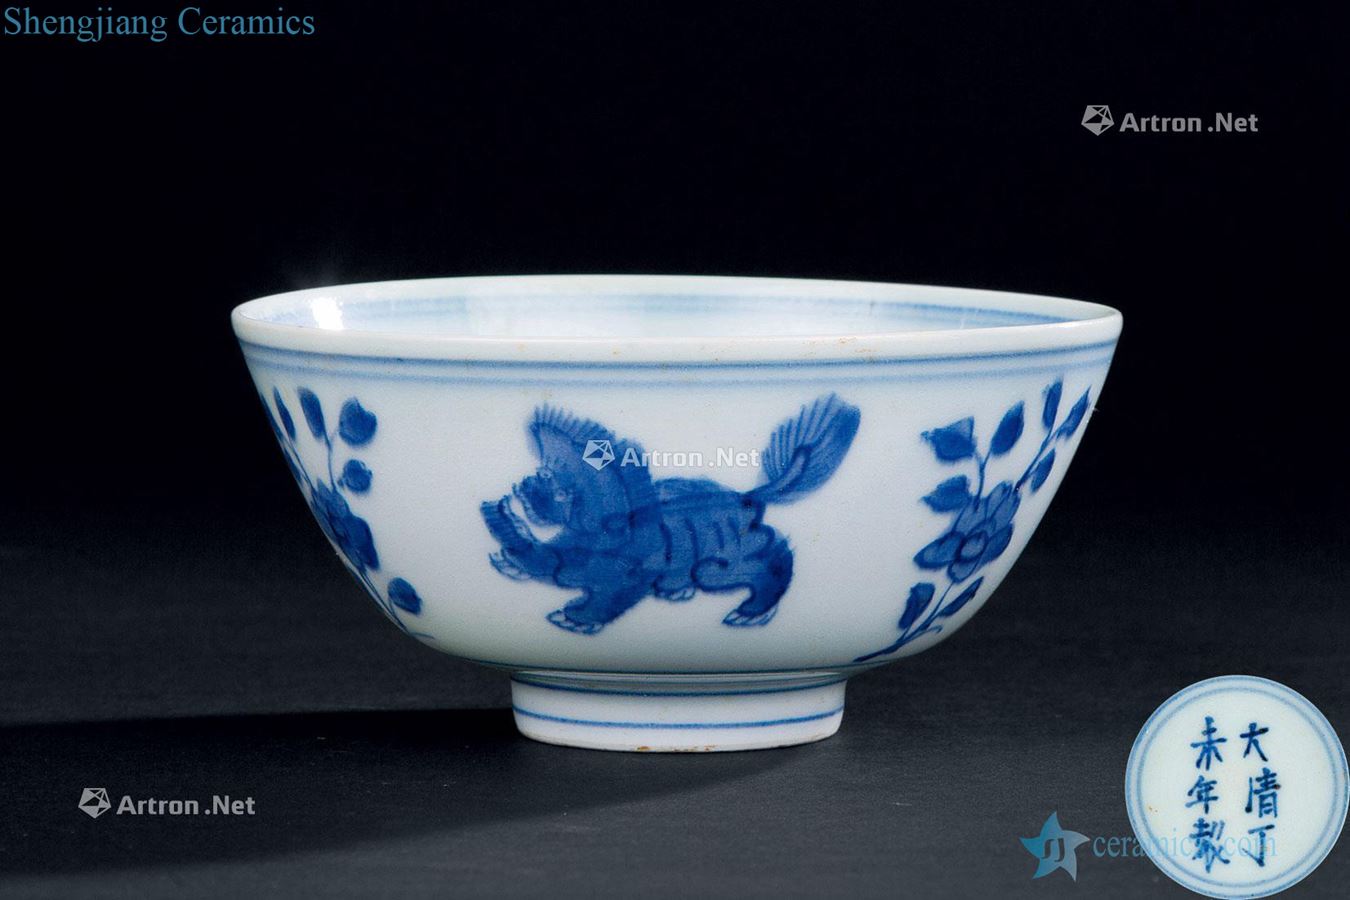 In the qing dynasty (1644-1911) blue and red lion flowers green-splashed bowls